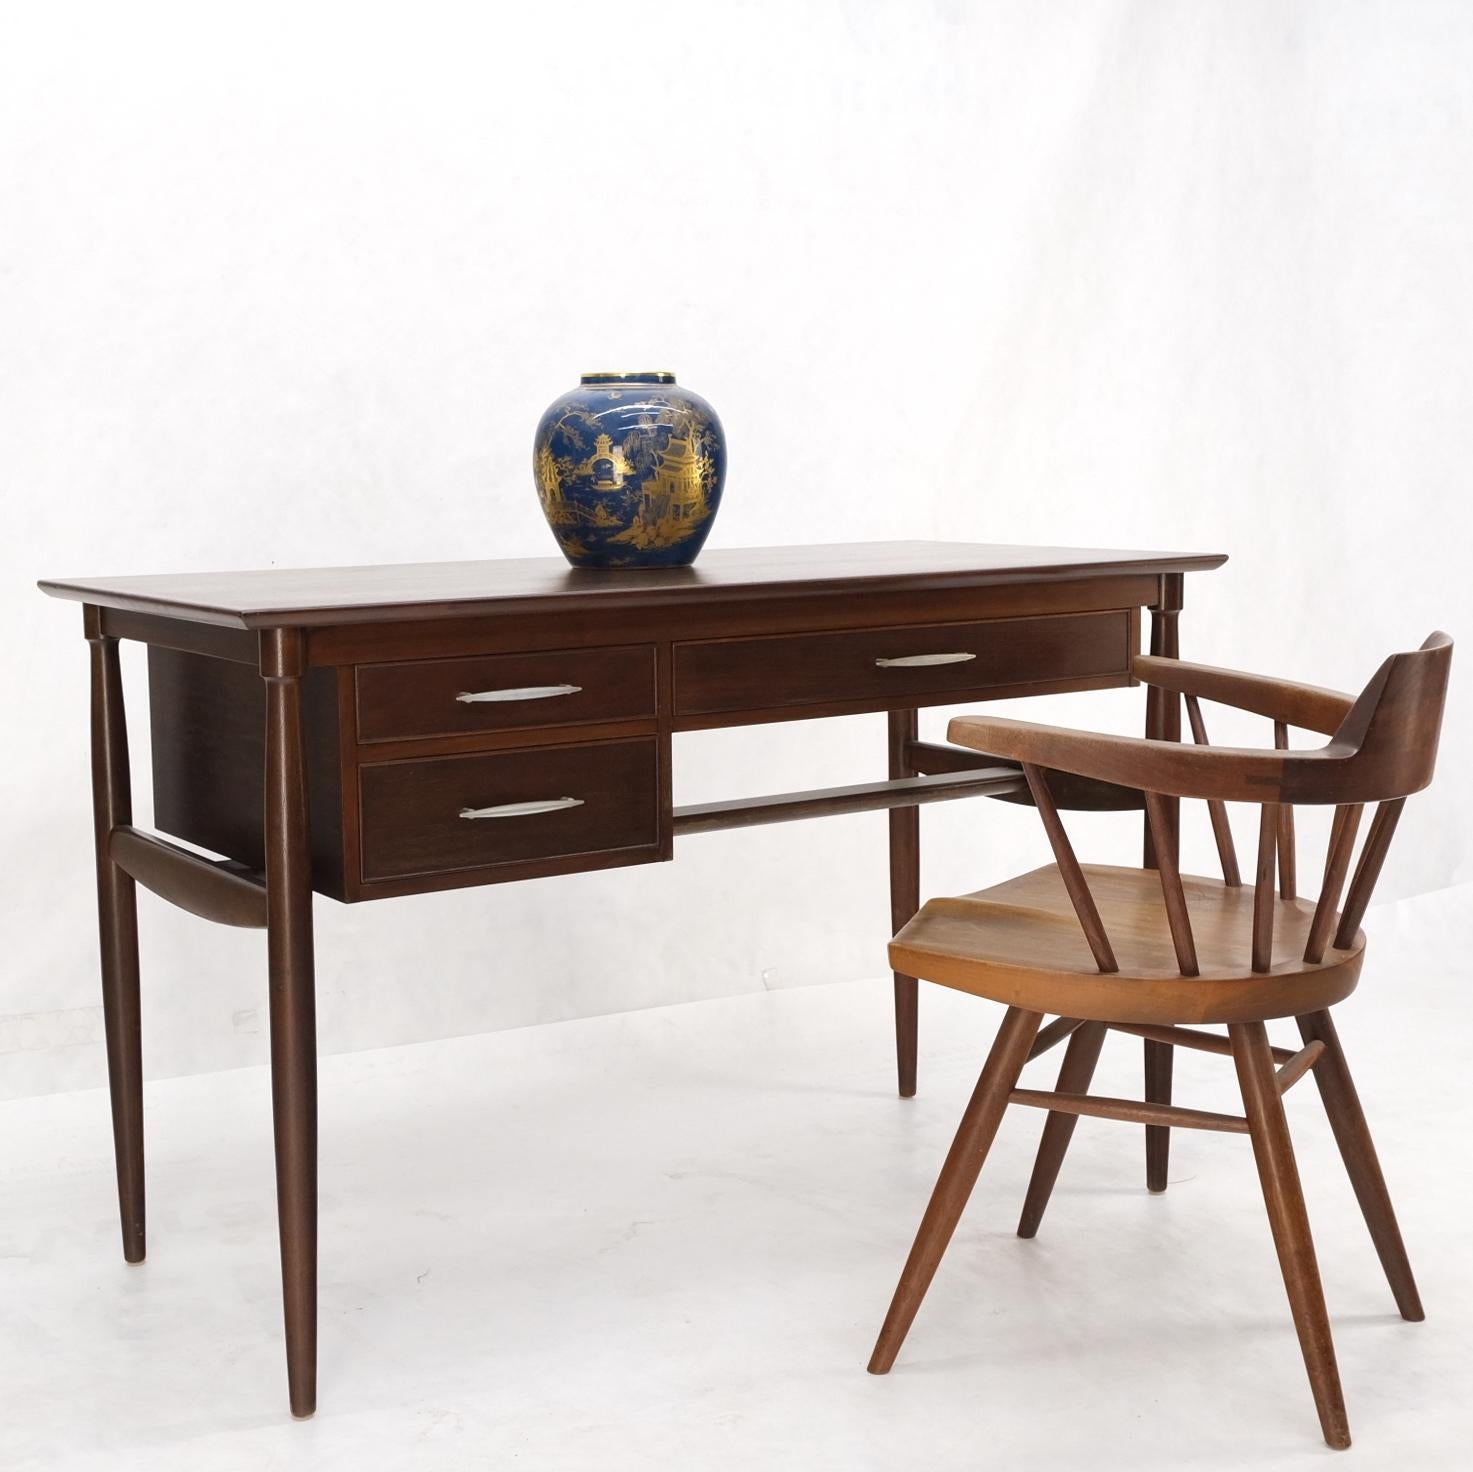 20th Century Exposed Dowel Shape Legs Floating Top 3 Drawers Walnut Desk Table Console Mint